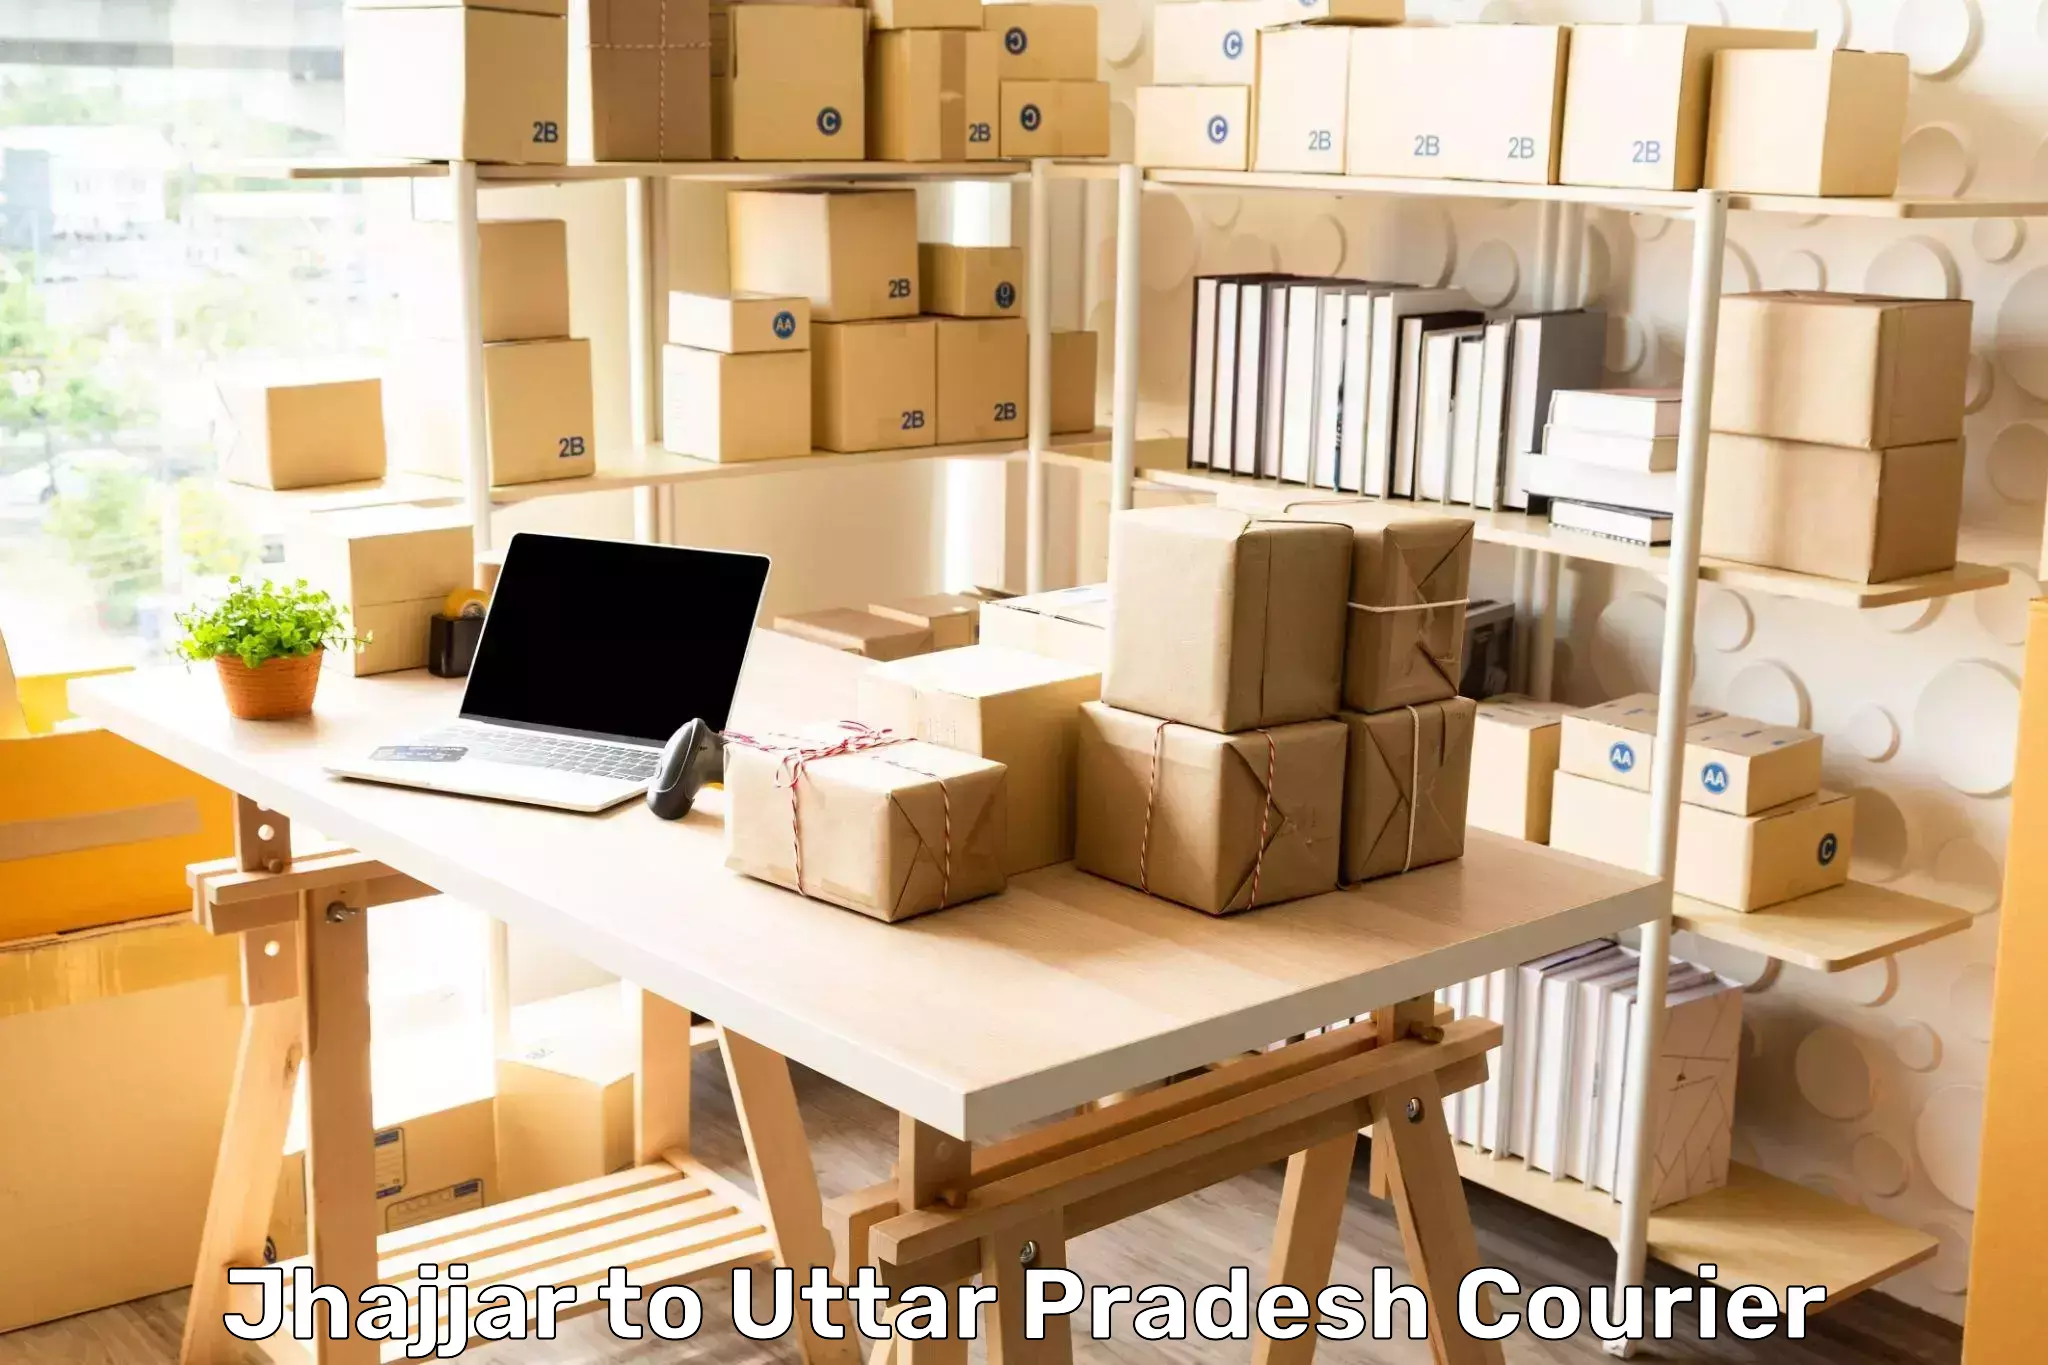 Nationwide shipping services Jhajjar to Meerut